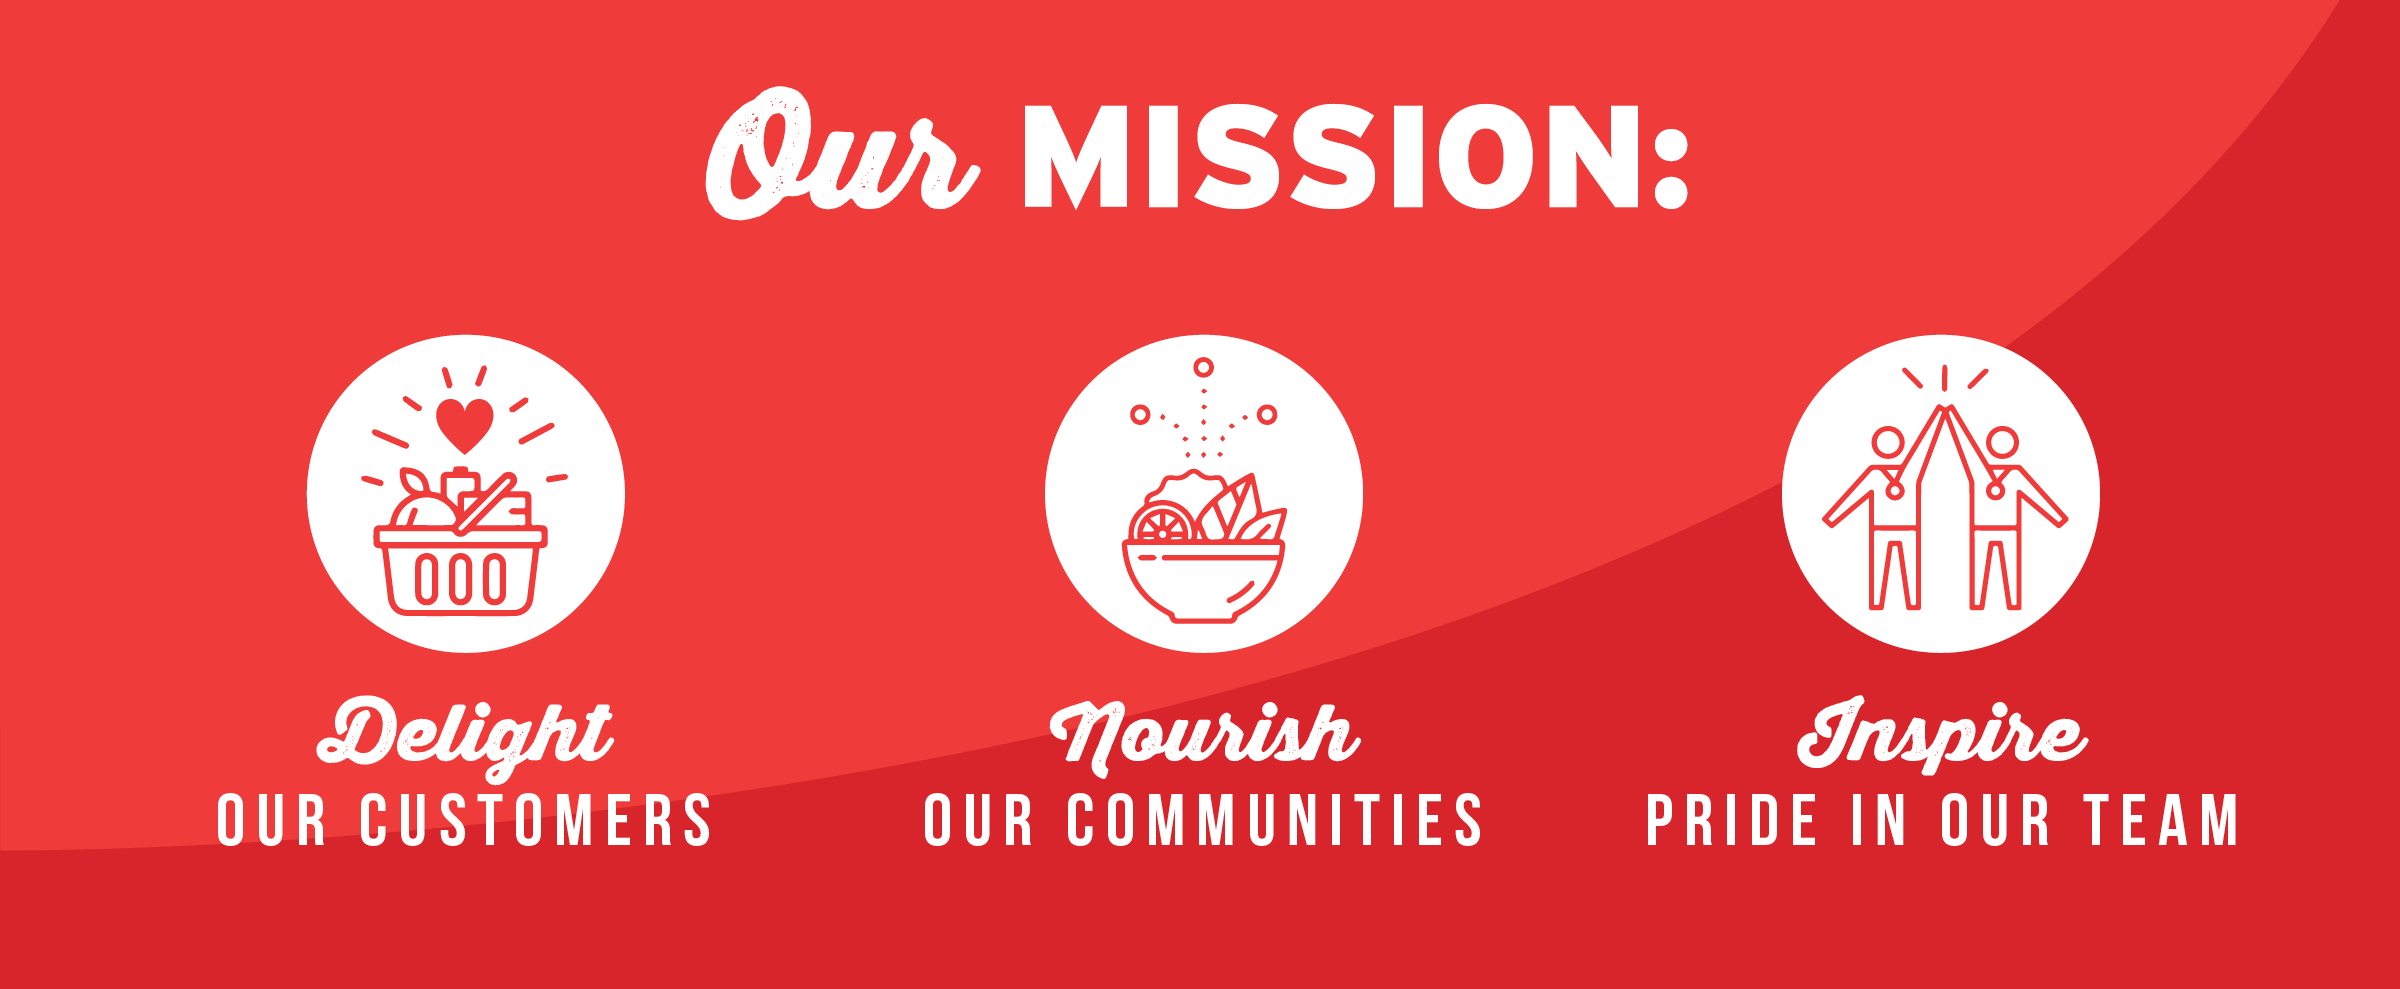 Our Mission: Delight Our Customers, Nourish Our Communities, Inspire Pride In Our Team